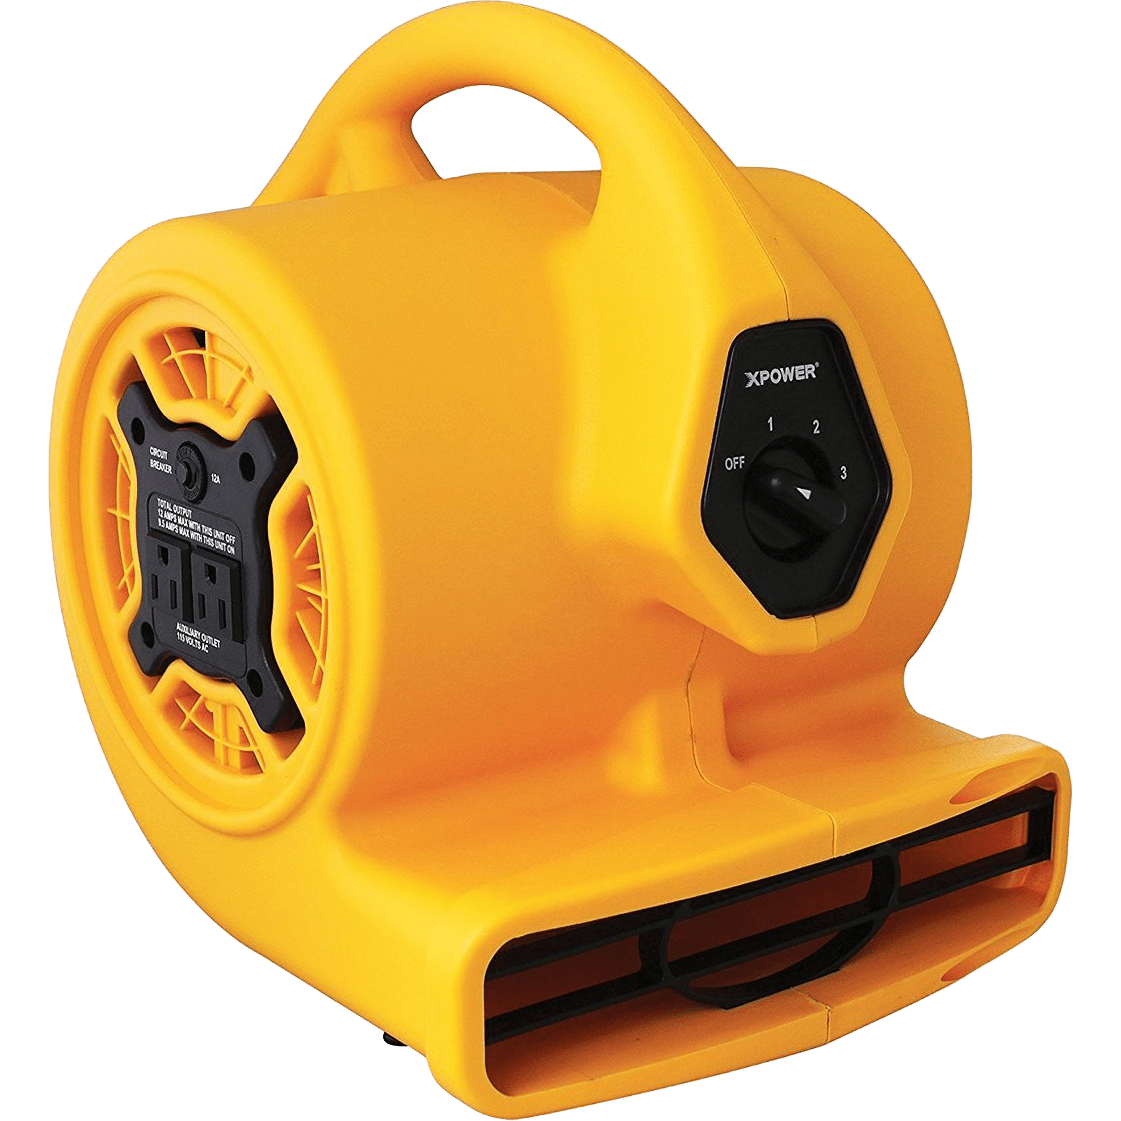 Xpower 700 Cfm Compact Air Mover (p-130a)